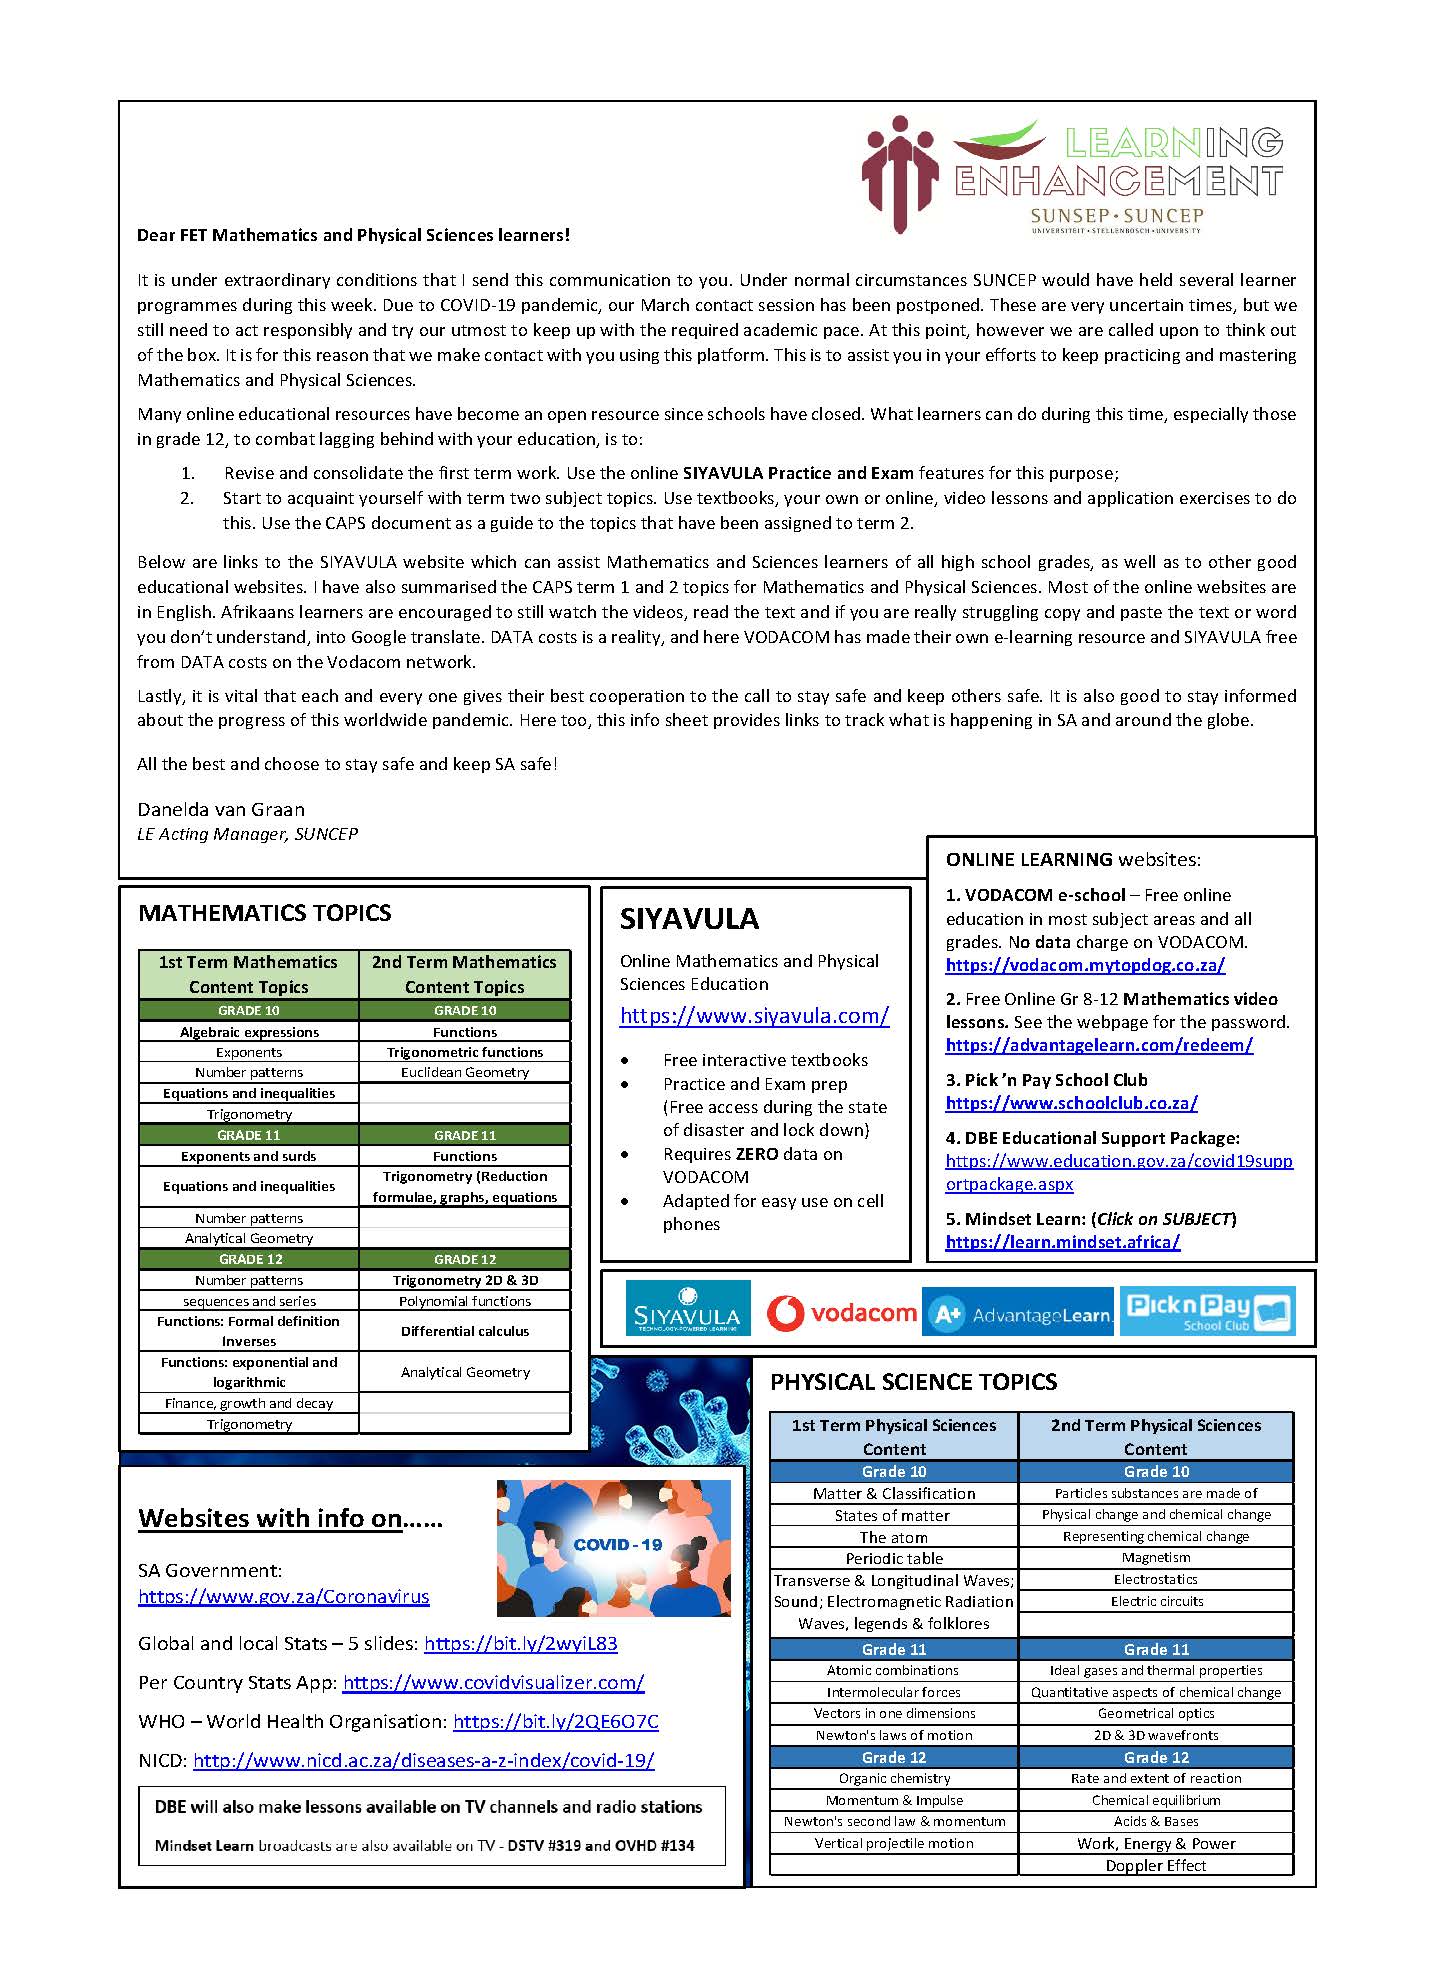 Resources info sheet for LE Learners March 2020.jpg